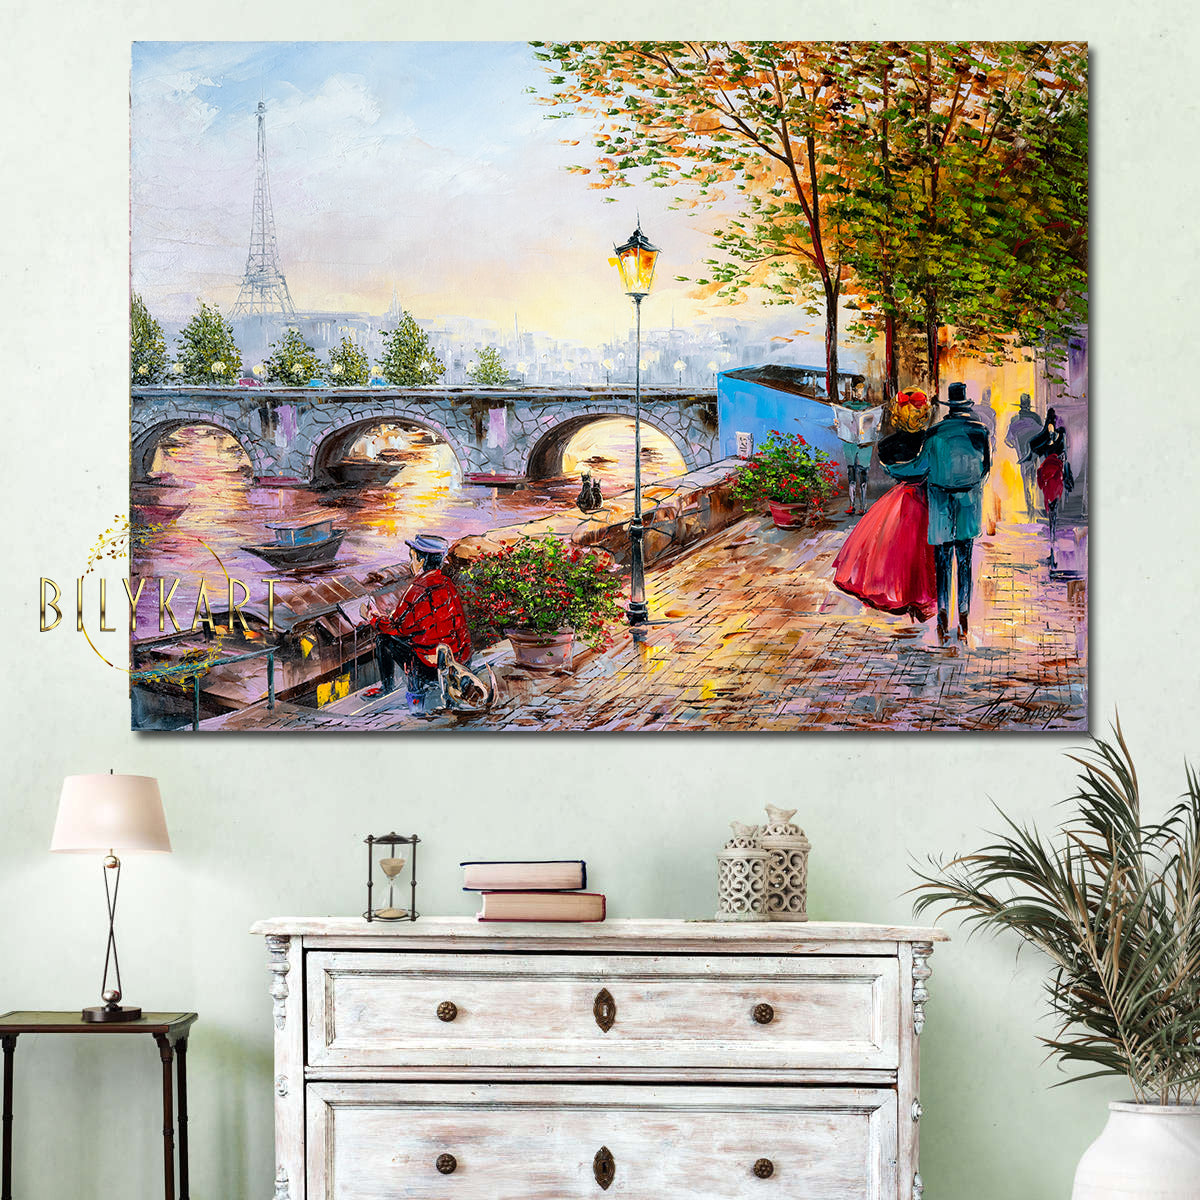 Night In Paris Painting on Canvas, Parisian Wall Decor, Couple Walking in Paris Painting, Eiffel Tower Wall Art